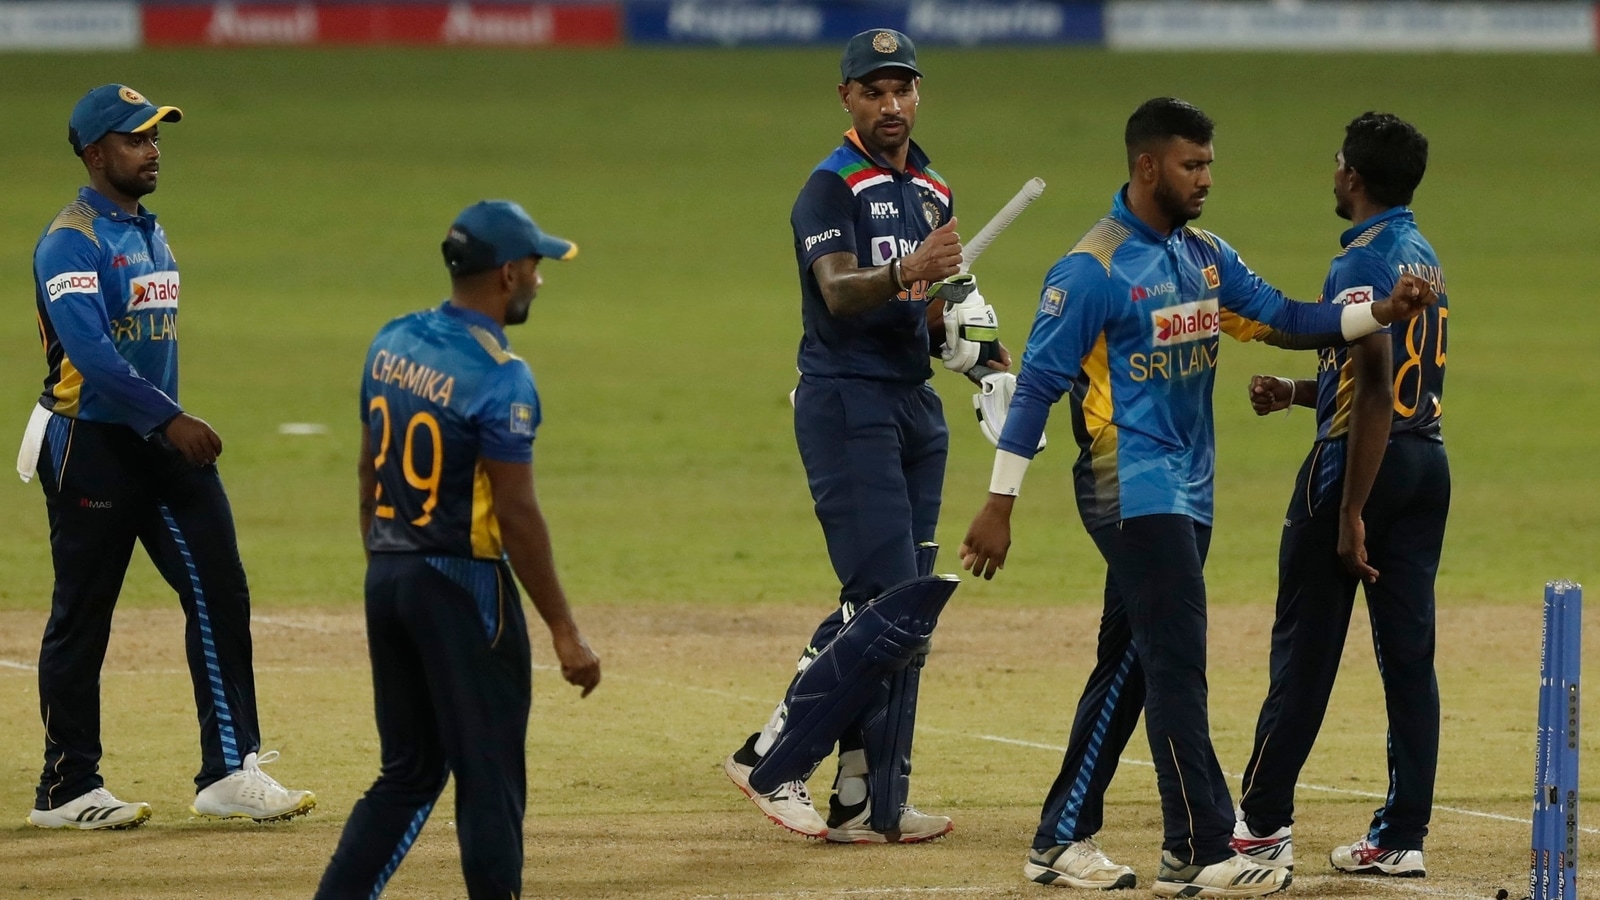 India vs Sri Lanka 2nd ODI Live Streaming When and where to watch IND vs SL 2nd ODI Live on TV and Online Cricket